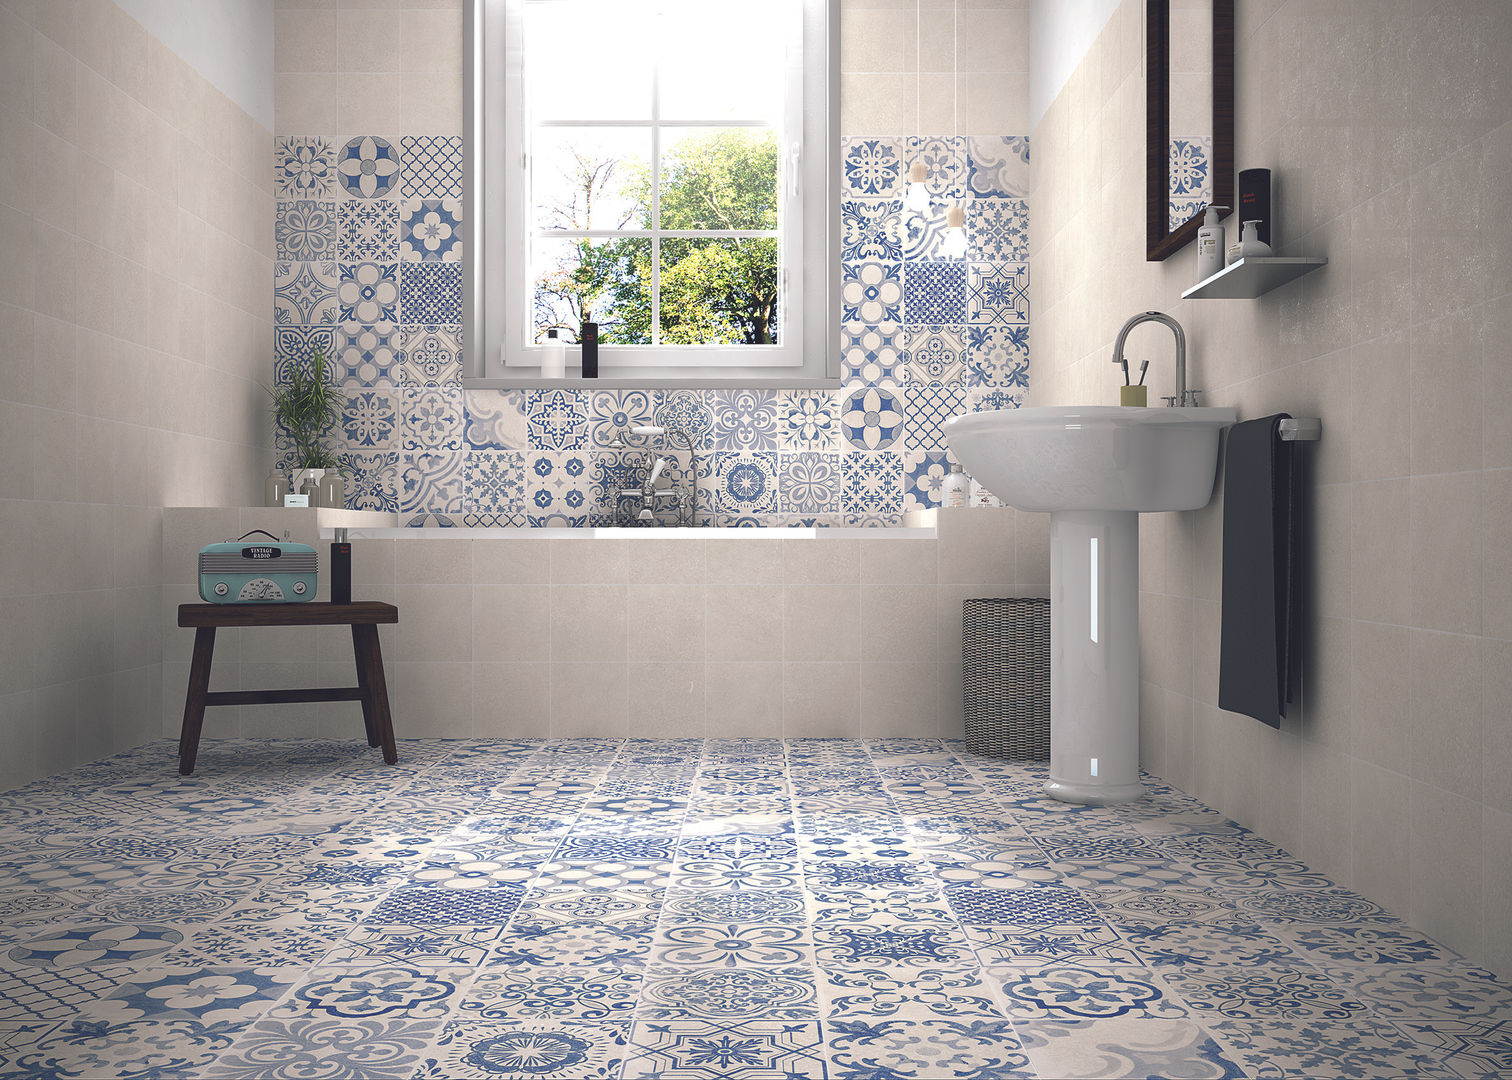 Skyros wall and floor tiles homify 牆面 磁磚